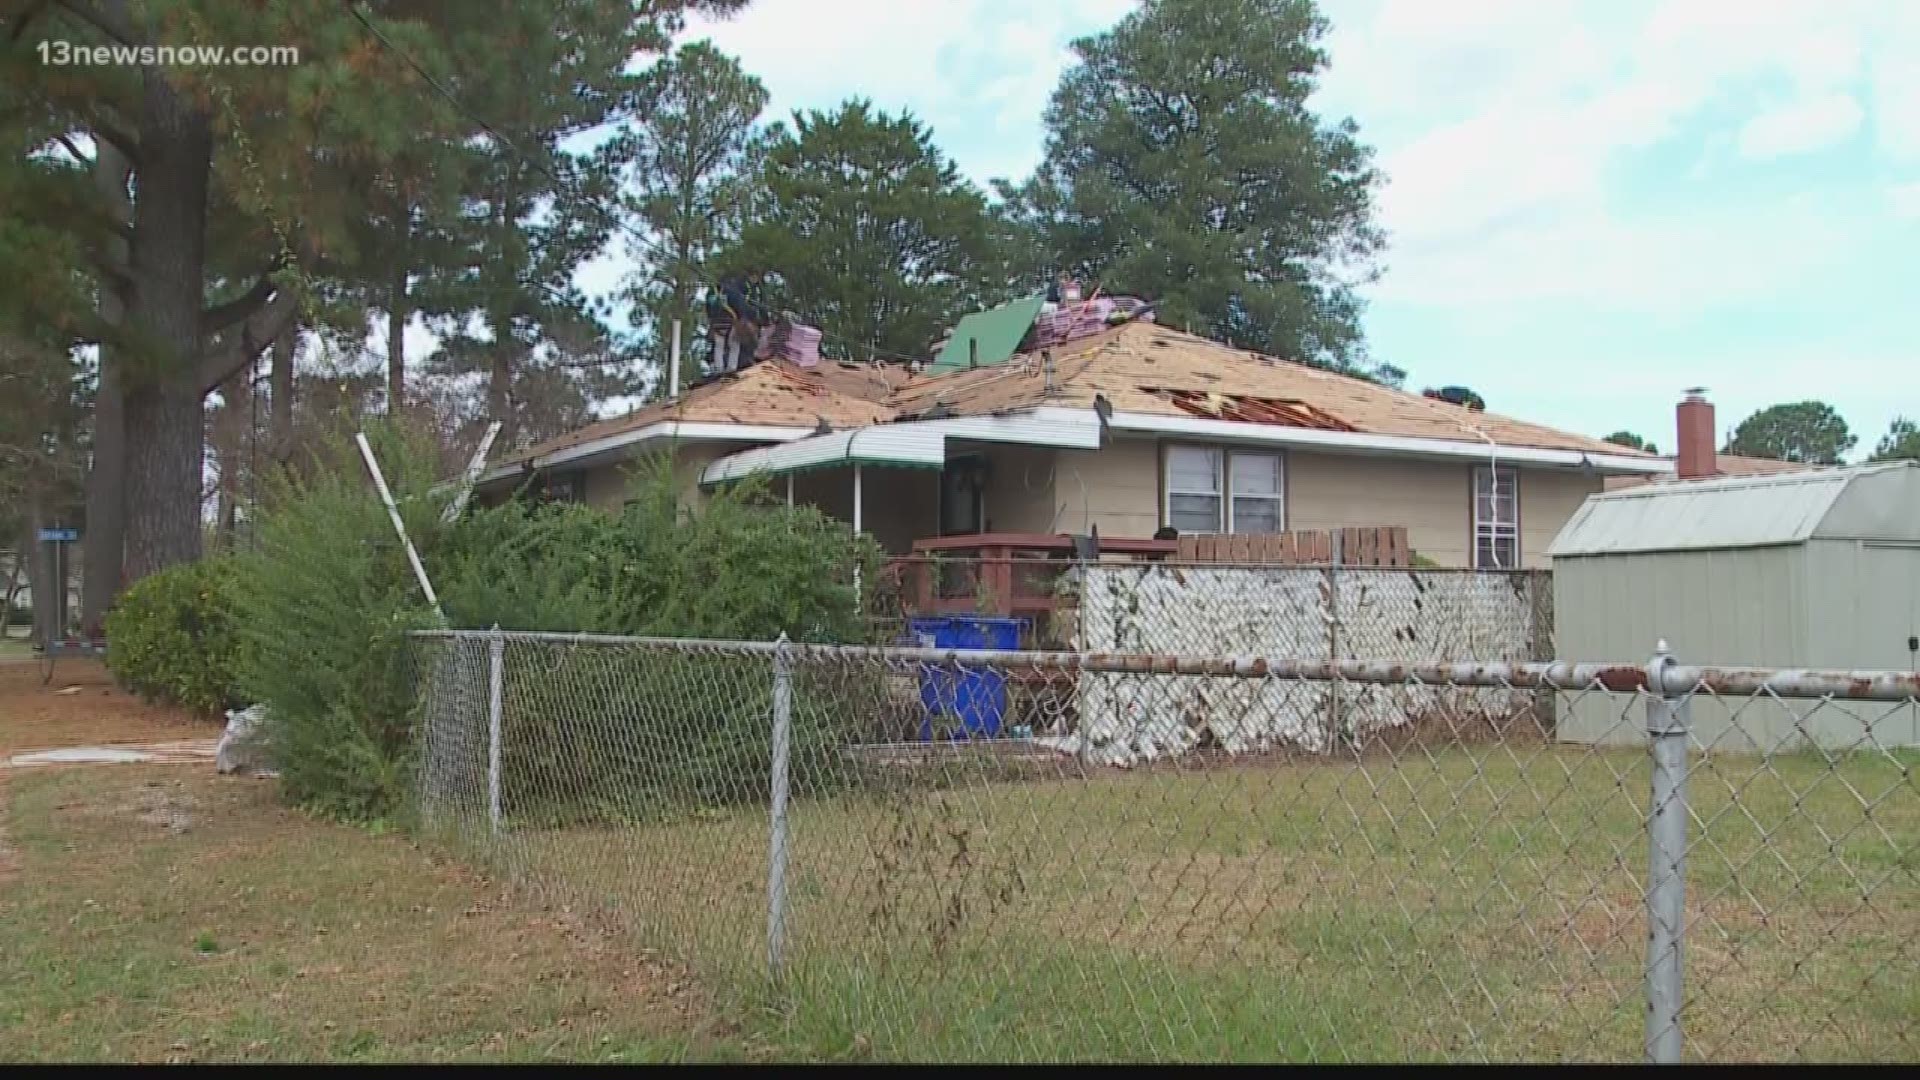 A local Navy veteran has a new roof over his head thanks to a local roofing company.